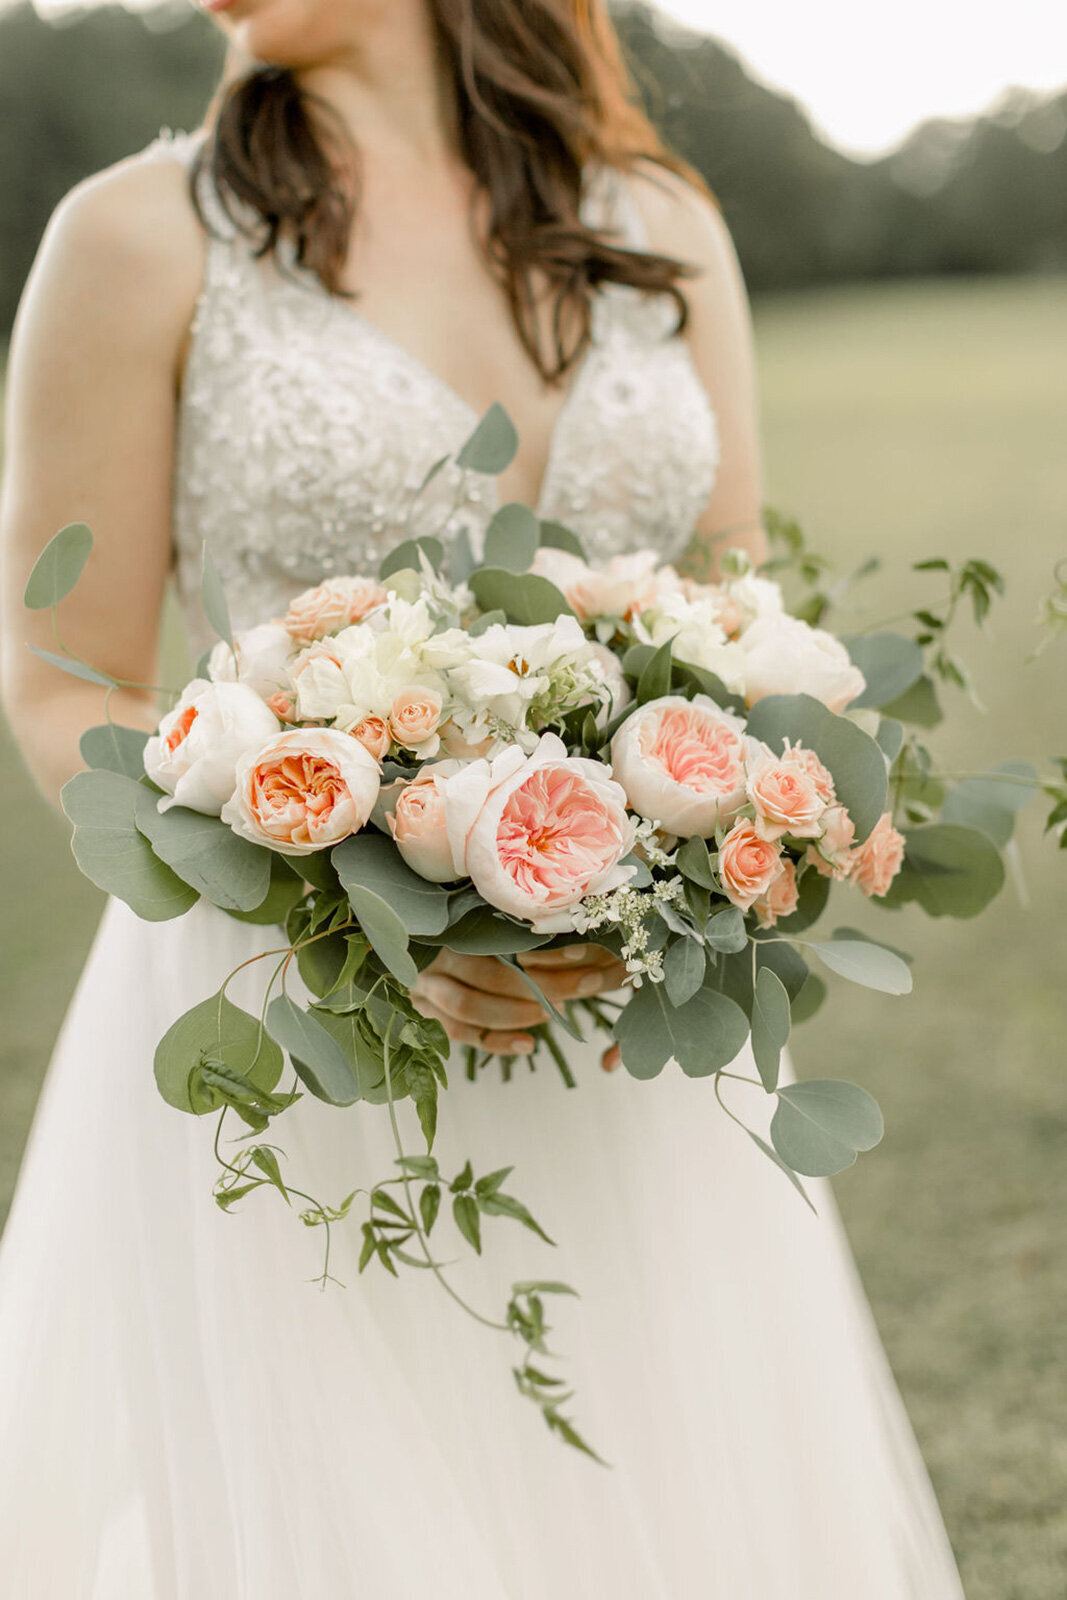 Charleston Elopement Planning | Intimate and Romantic Elopements with Styled Elopements ™ by Pure Luxe Bride.